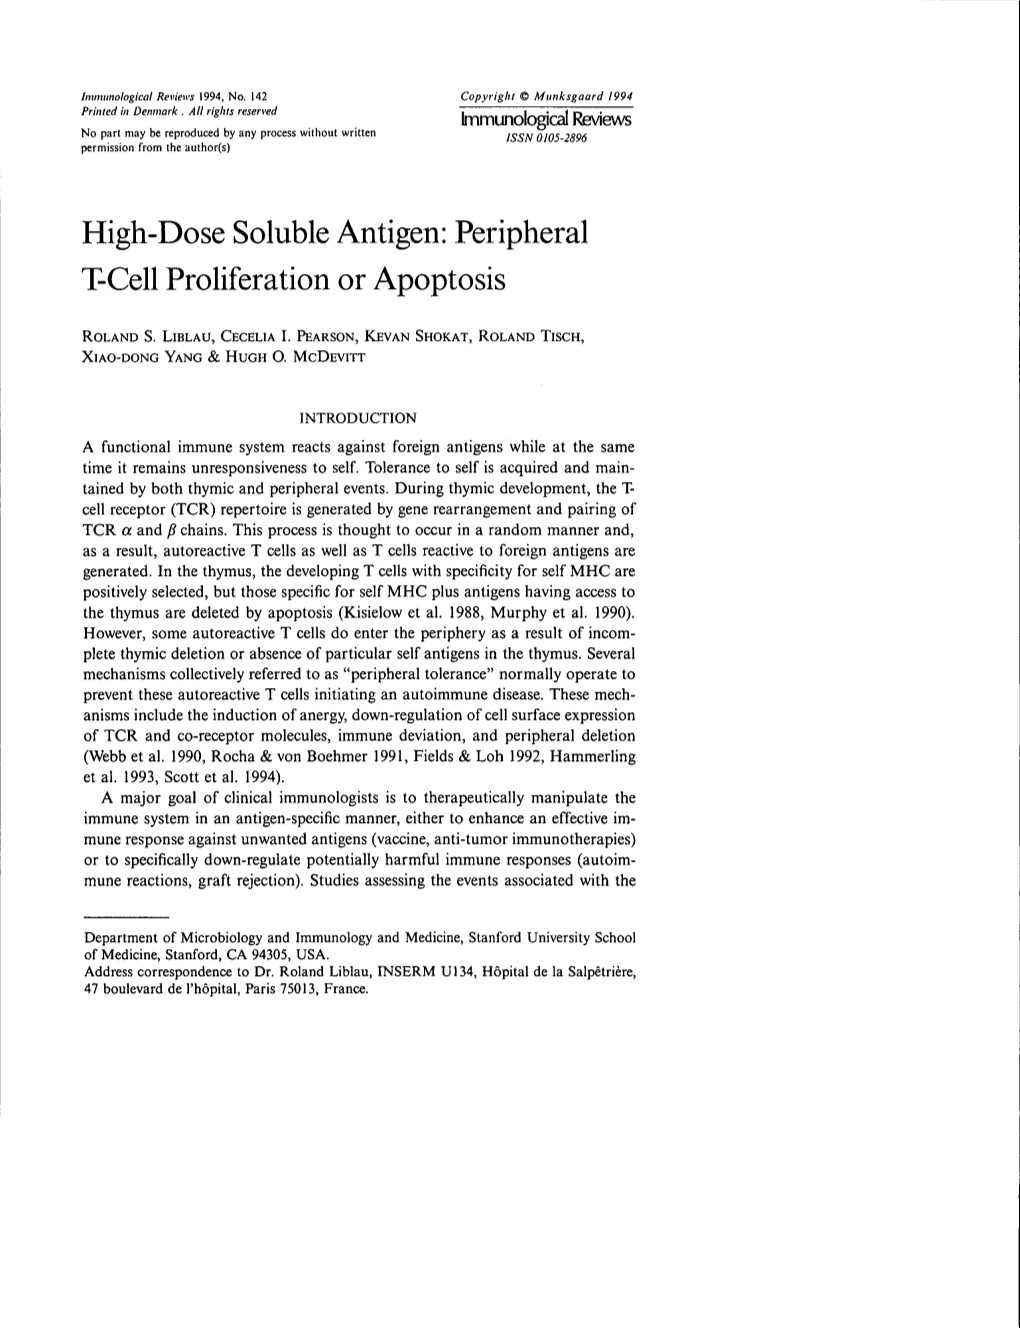 High-Dose Soluble Antigen: Peripheral T-Cell Proliferation Or Apoptosis